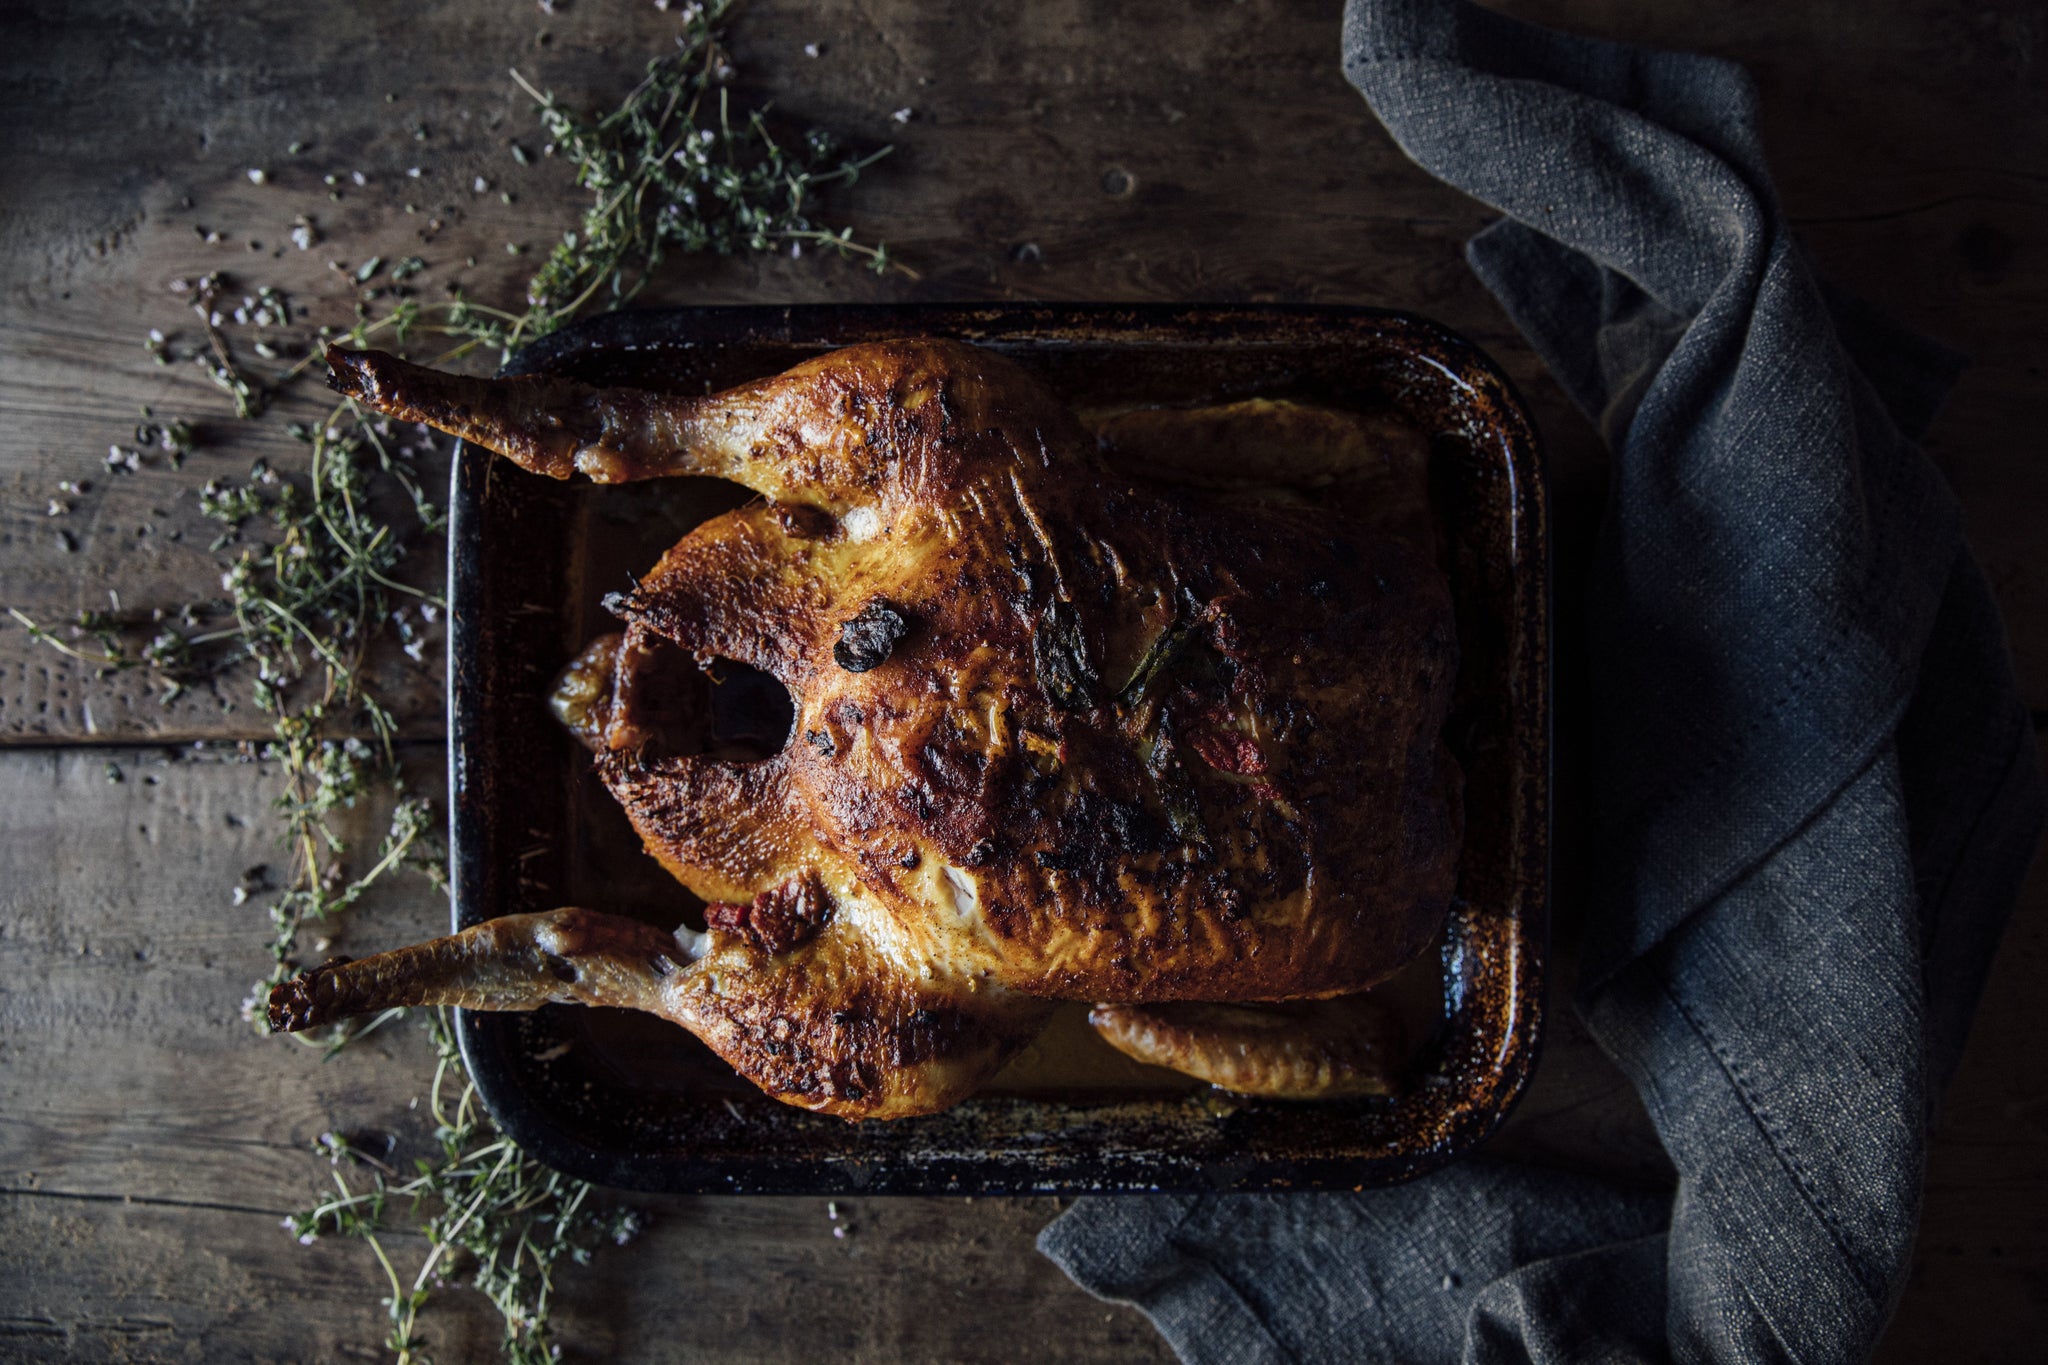 a herb-fed, free range chicken that has been roasted and is ready to carve